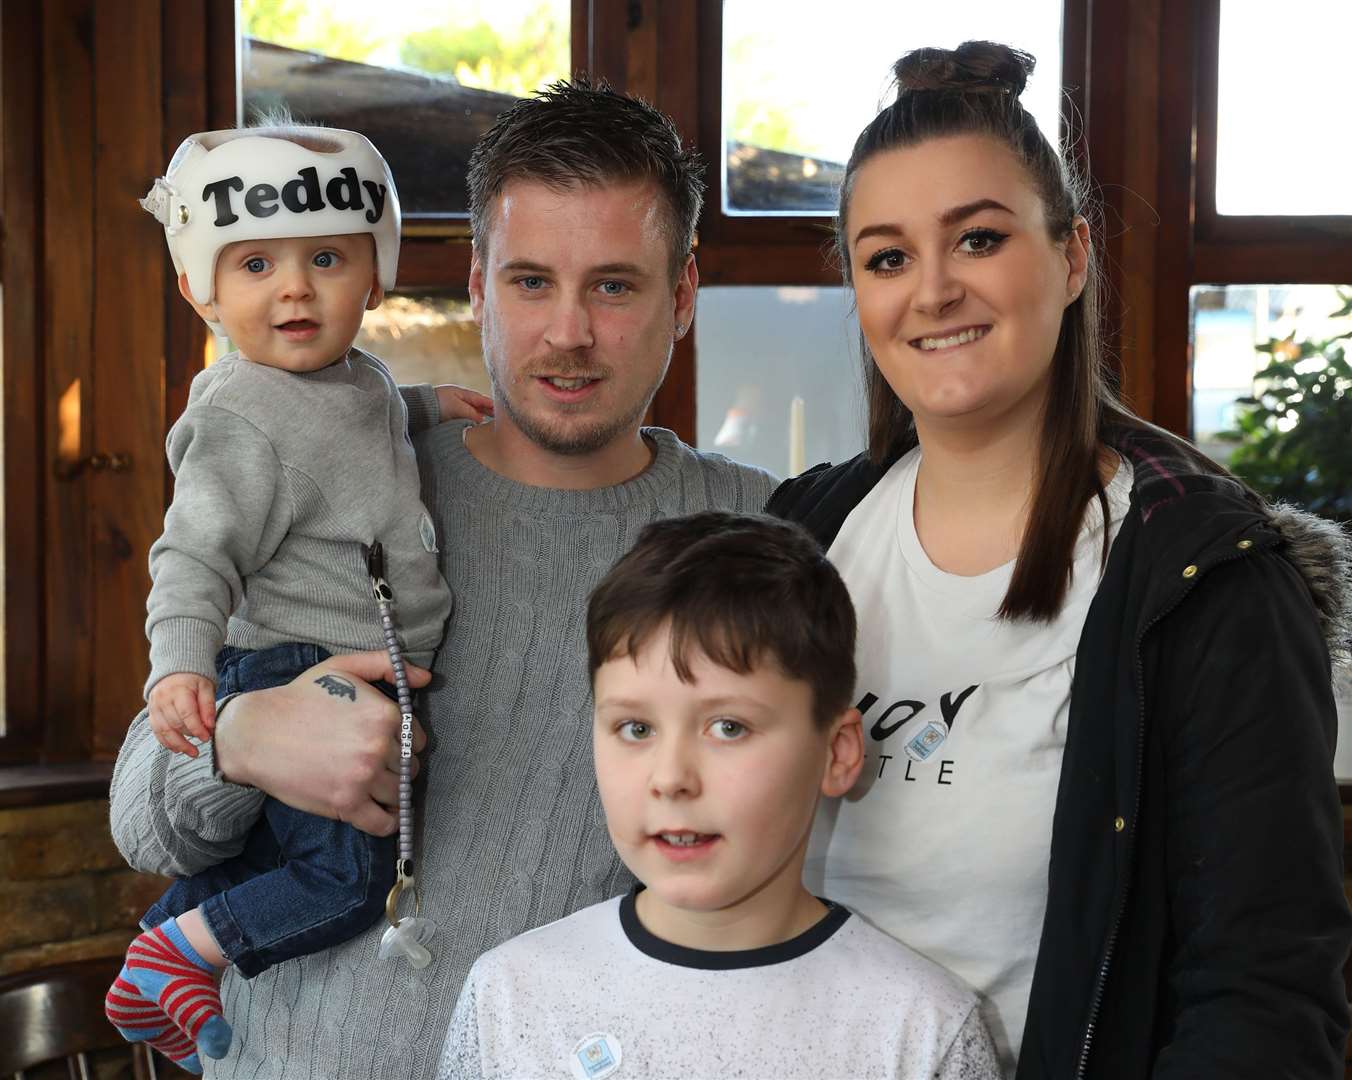 Teddy with dad, Ben Hayes, mum Callie and brother Archie. Picture: Andy Jones